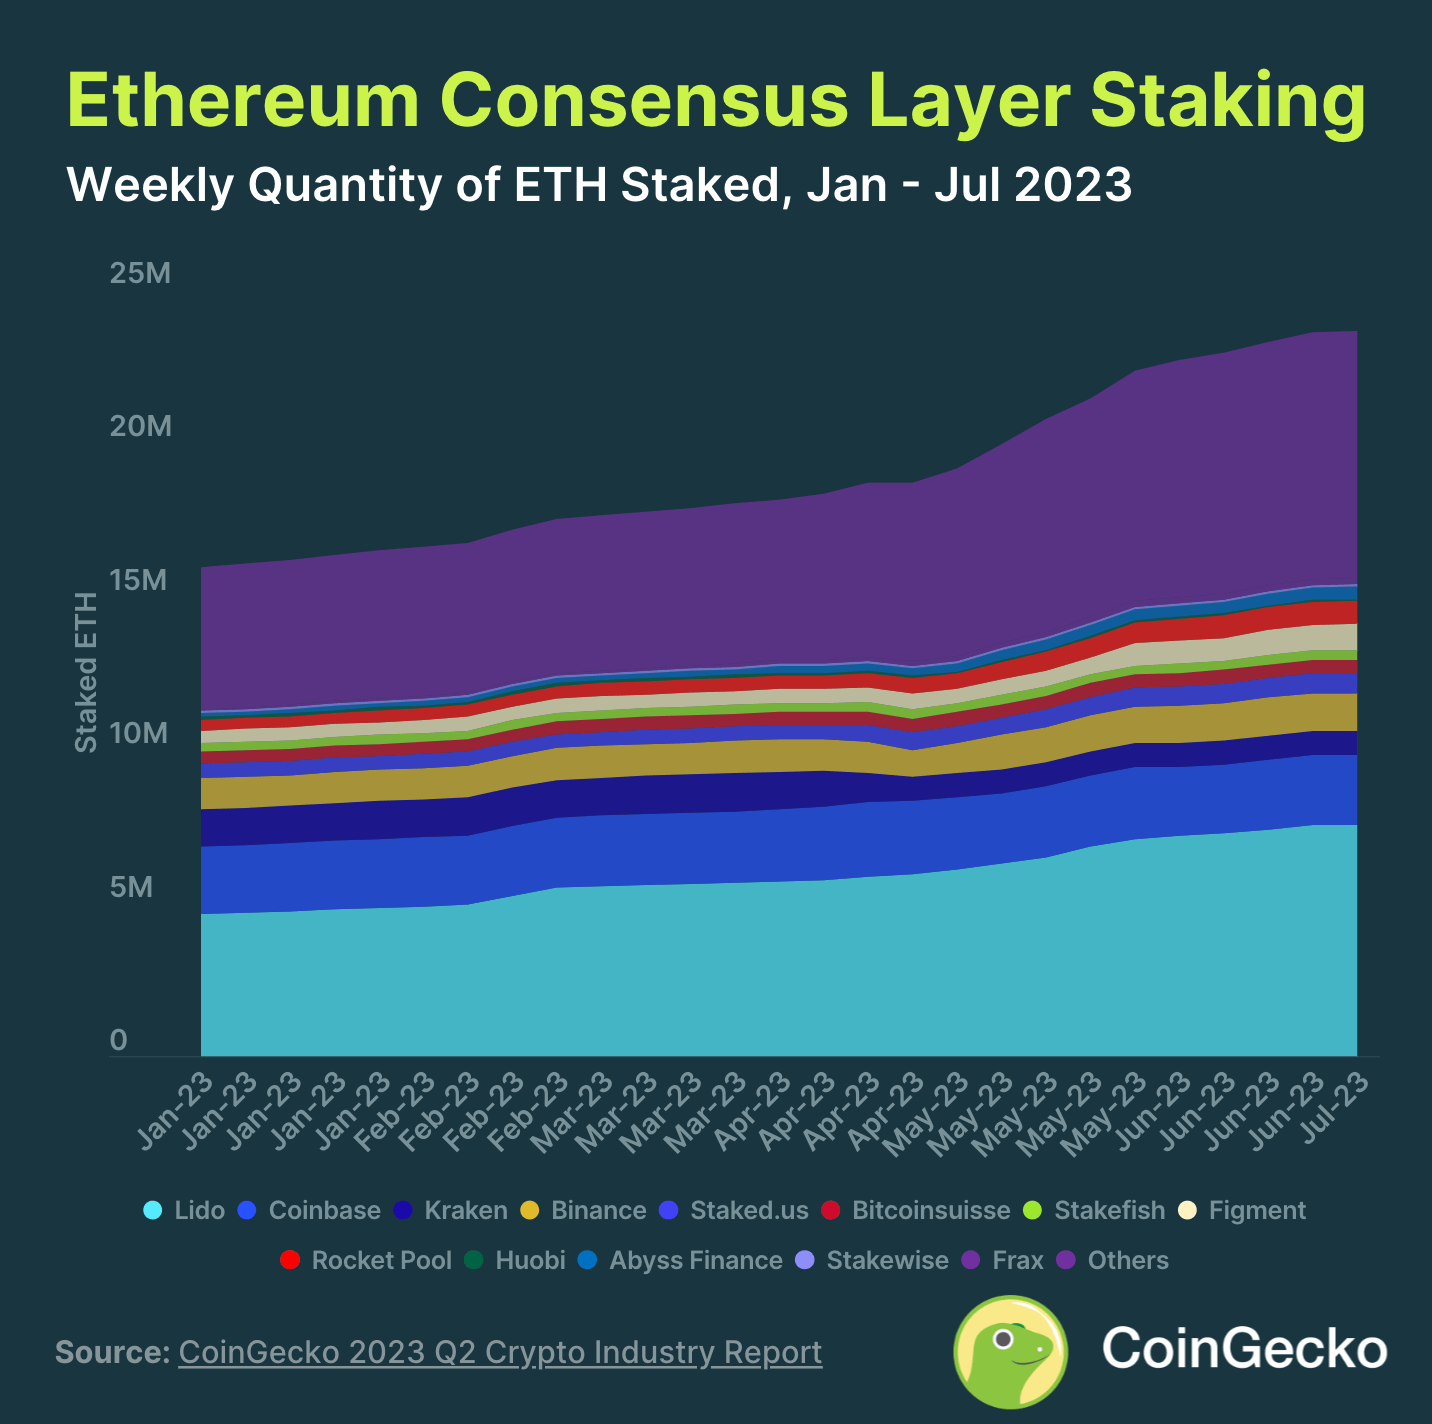 5. Staked ETH Grows in Q2